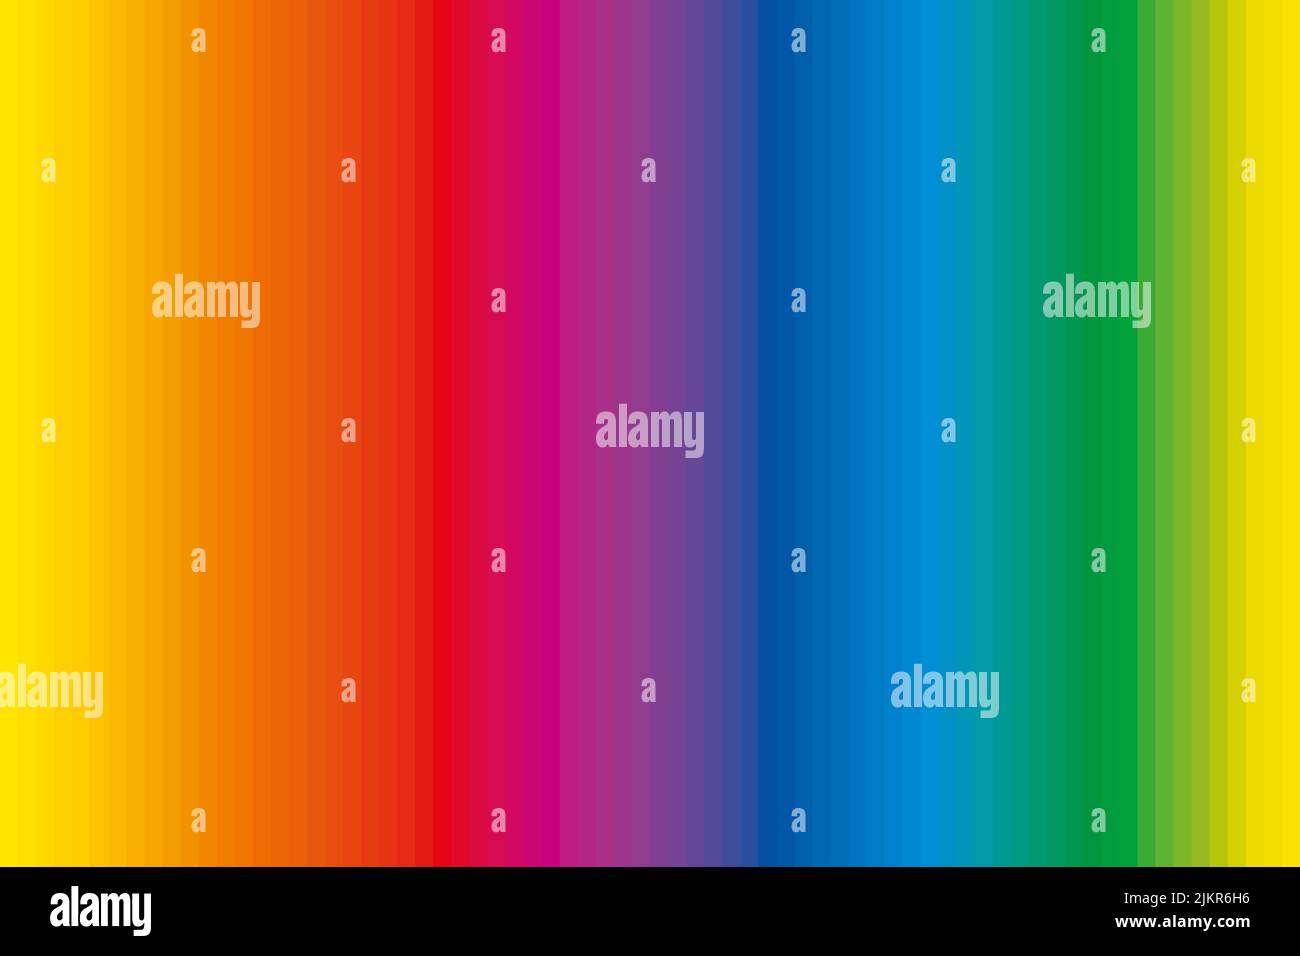 Color bars with complementary colors. Extended spectrum of 72 rainbow colored strips, unique color hues in a row, derived from a color wheel. Stock Photo